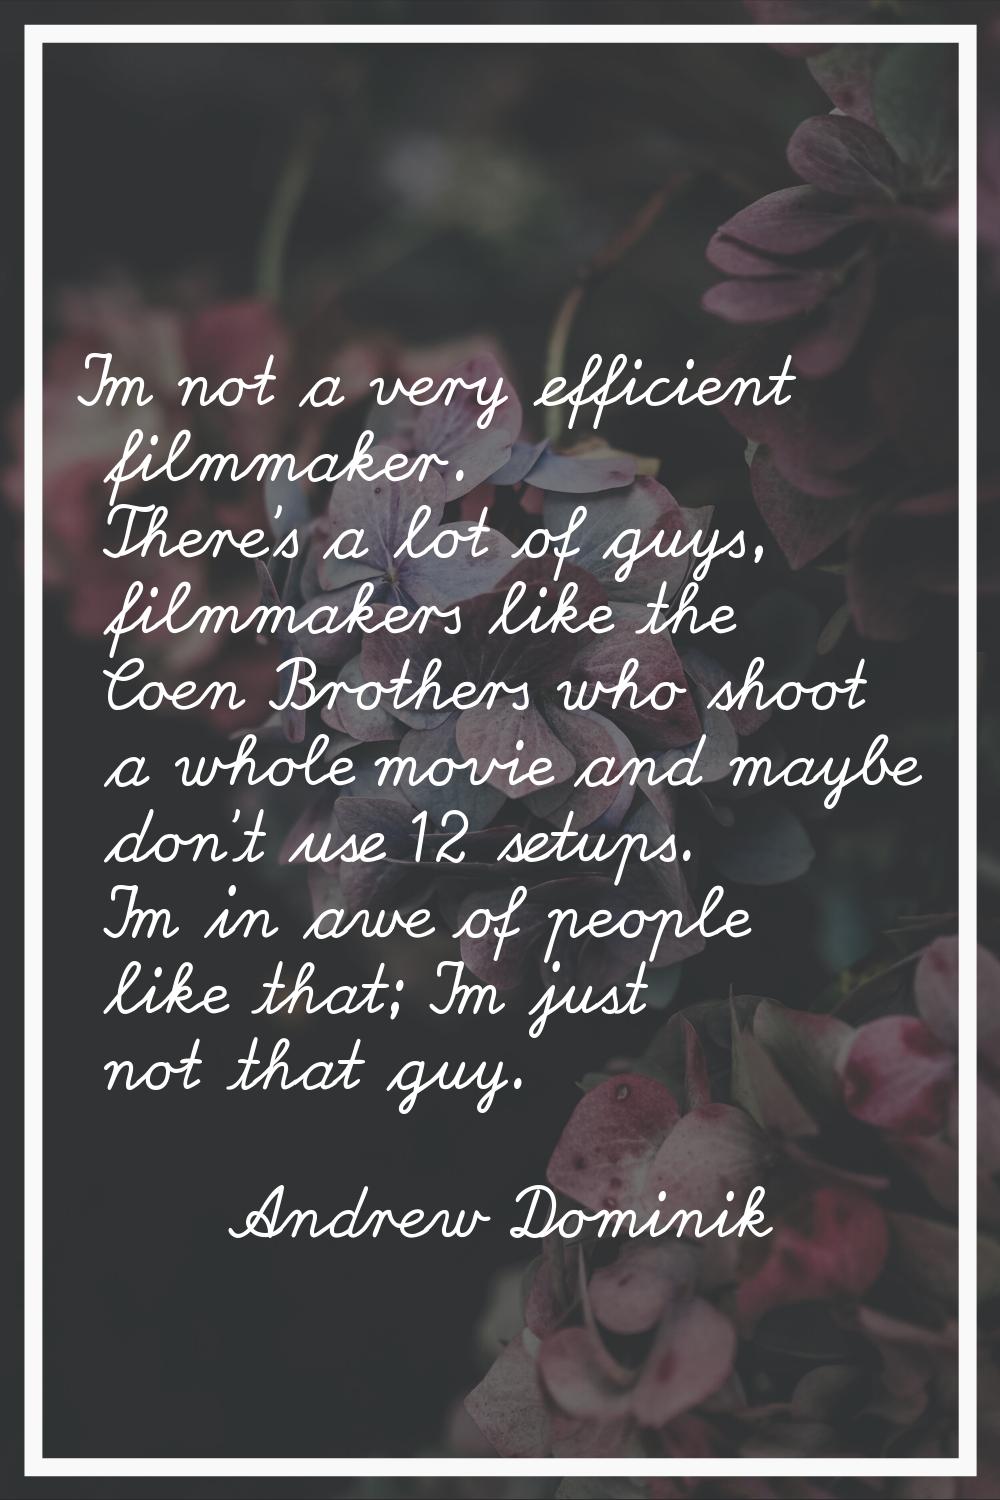 I'm not a very efficient filmmaker. There's a lot of guys, filmmakers like the Coen Brothers who sh